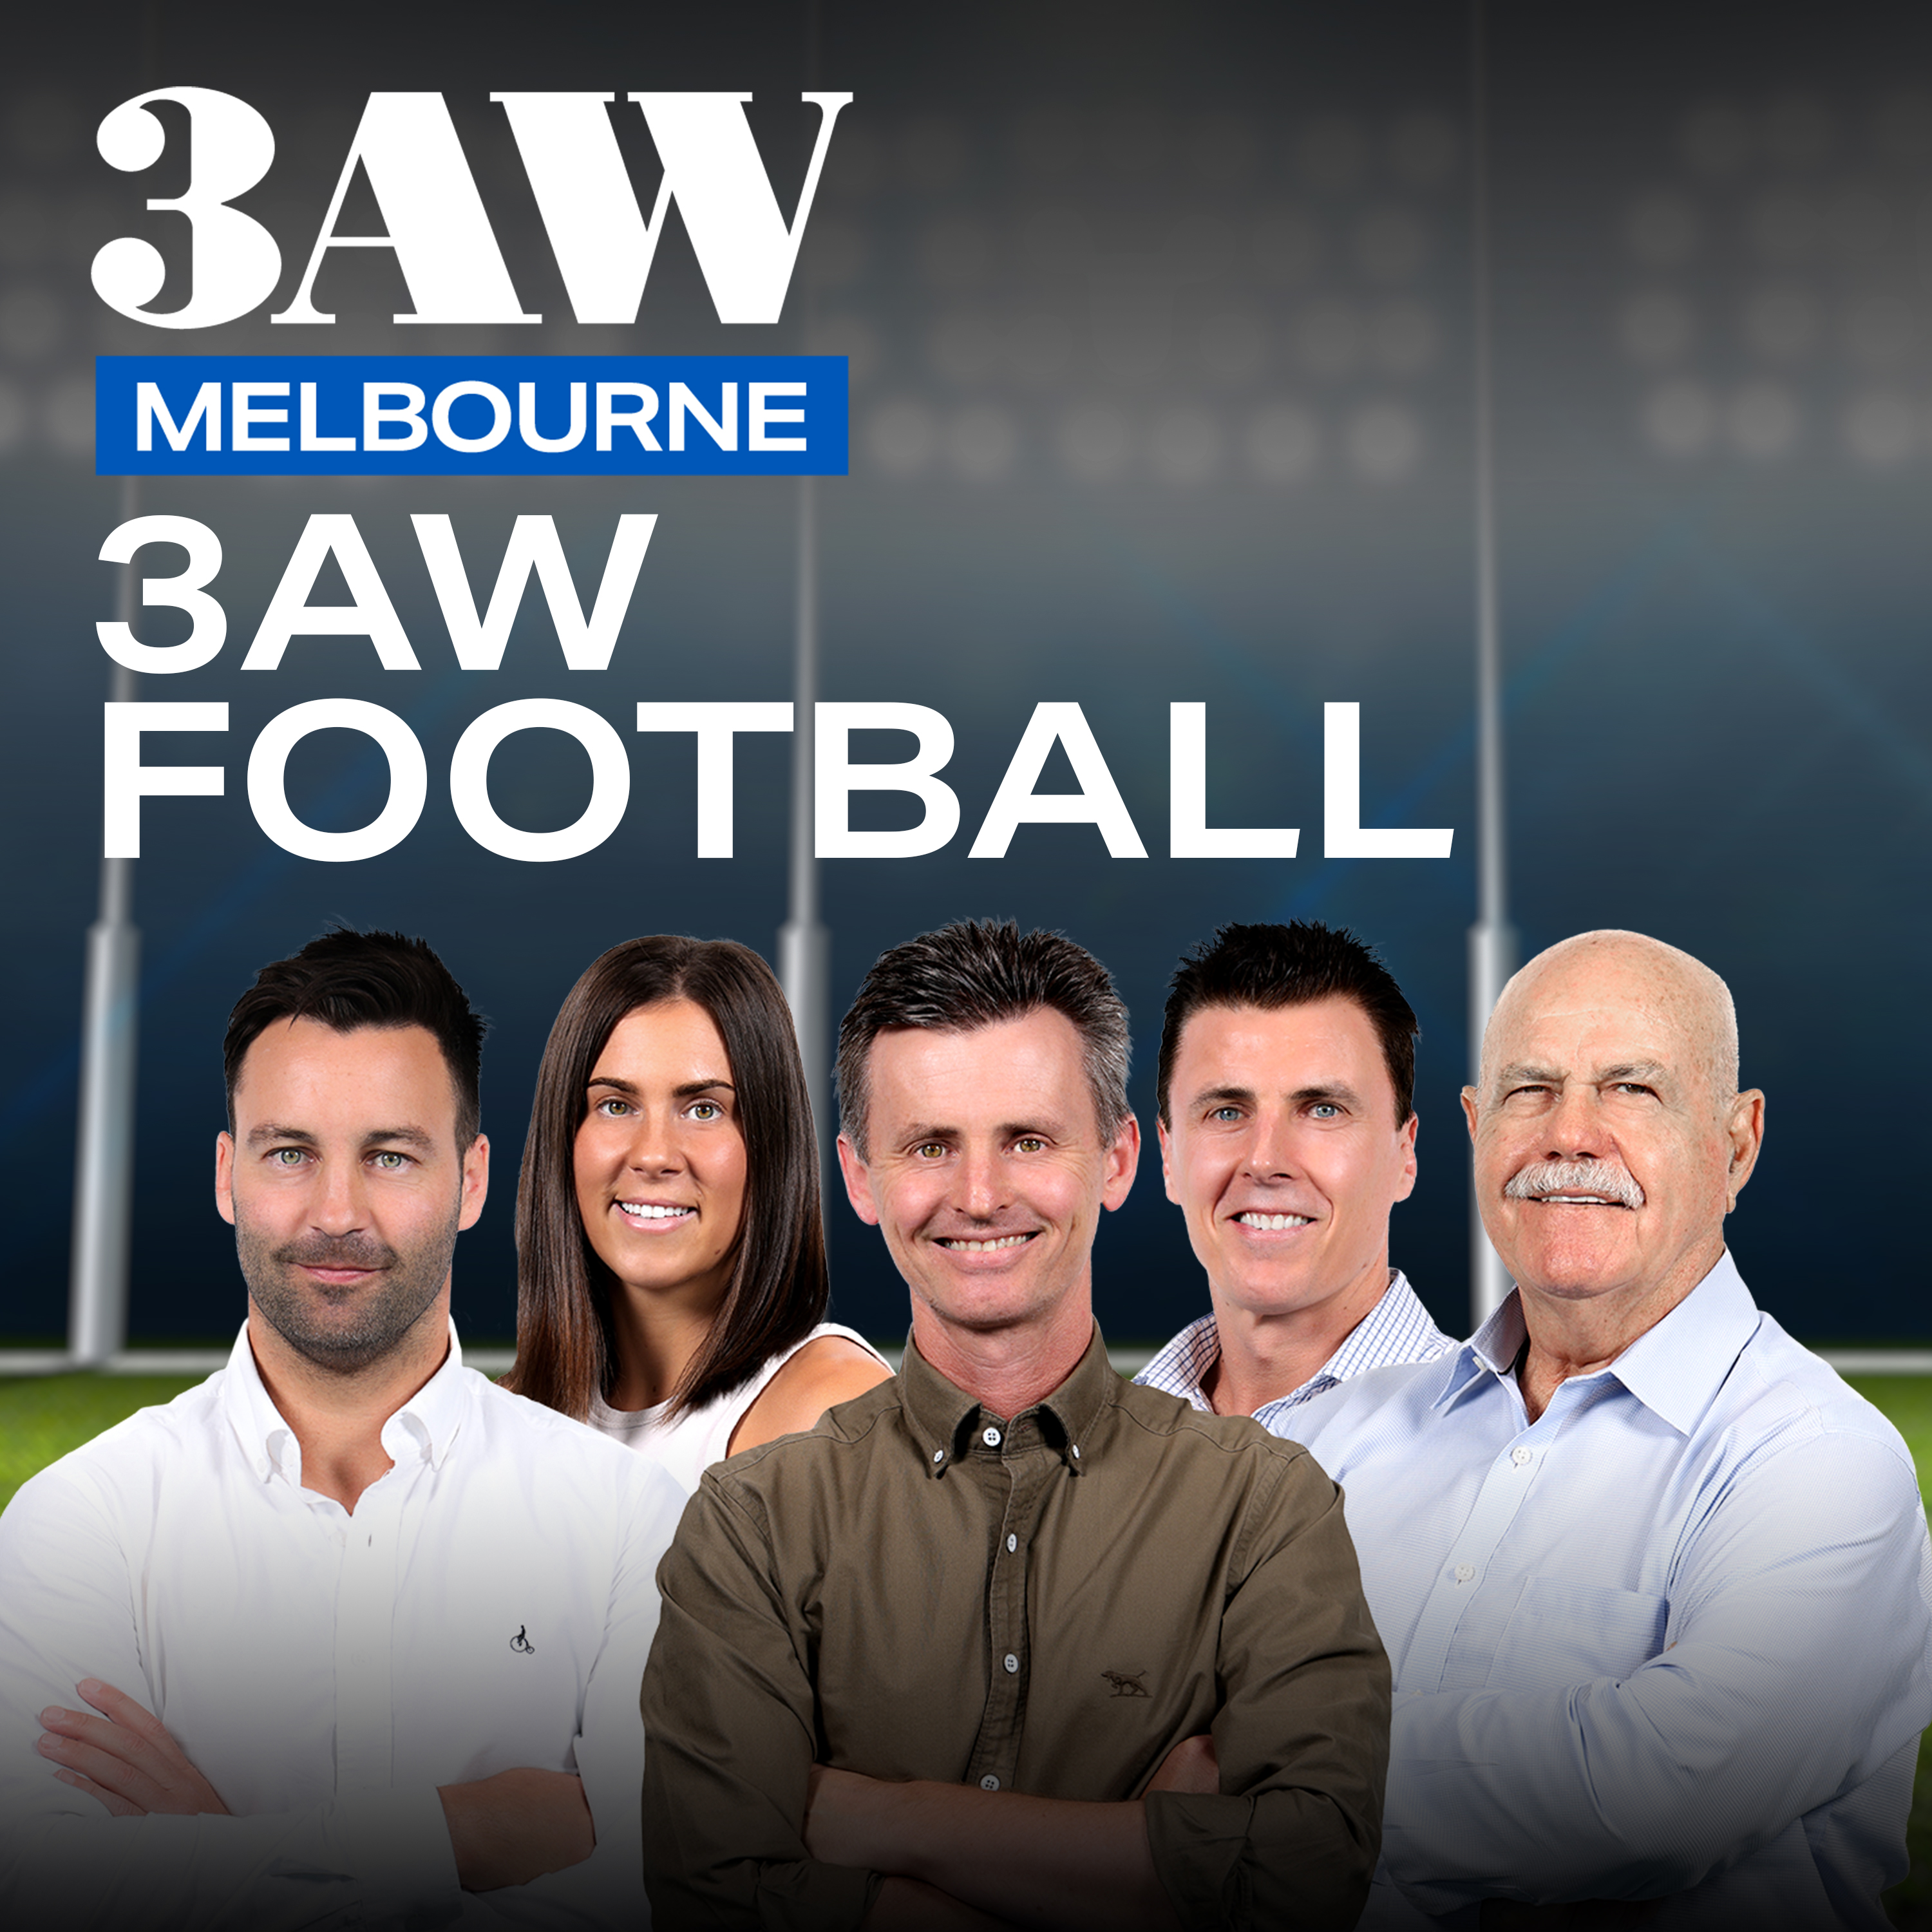 The divisive footy issue which prompted Leigh Matthews to call the 3AW talkback line